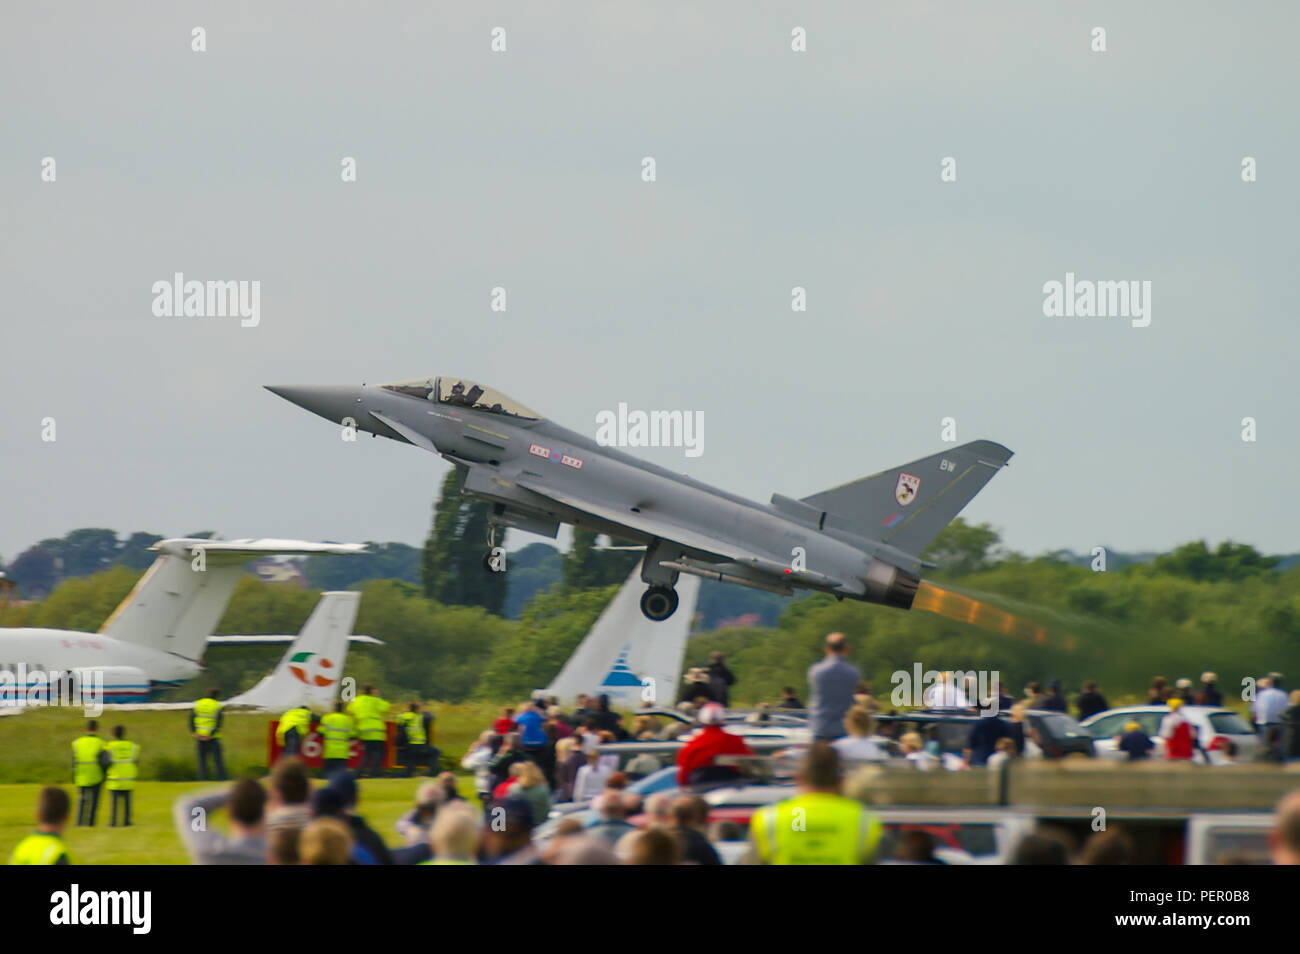 RAF Royal Air Force Eurofighter Typhoon F2 jet fighter plane of 29 Squadron at London Southend airport for the Southend Airshow. Taking off with crowd Stock Photo